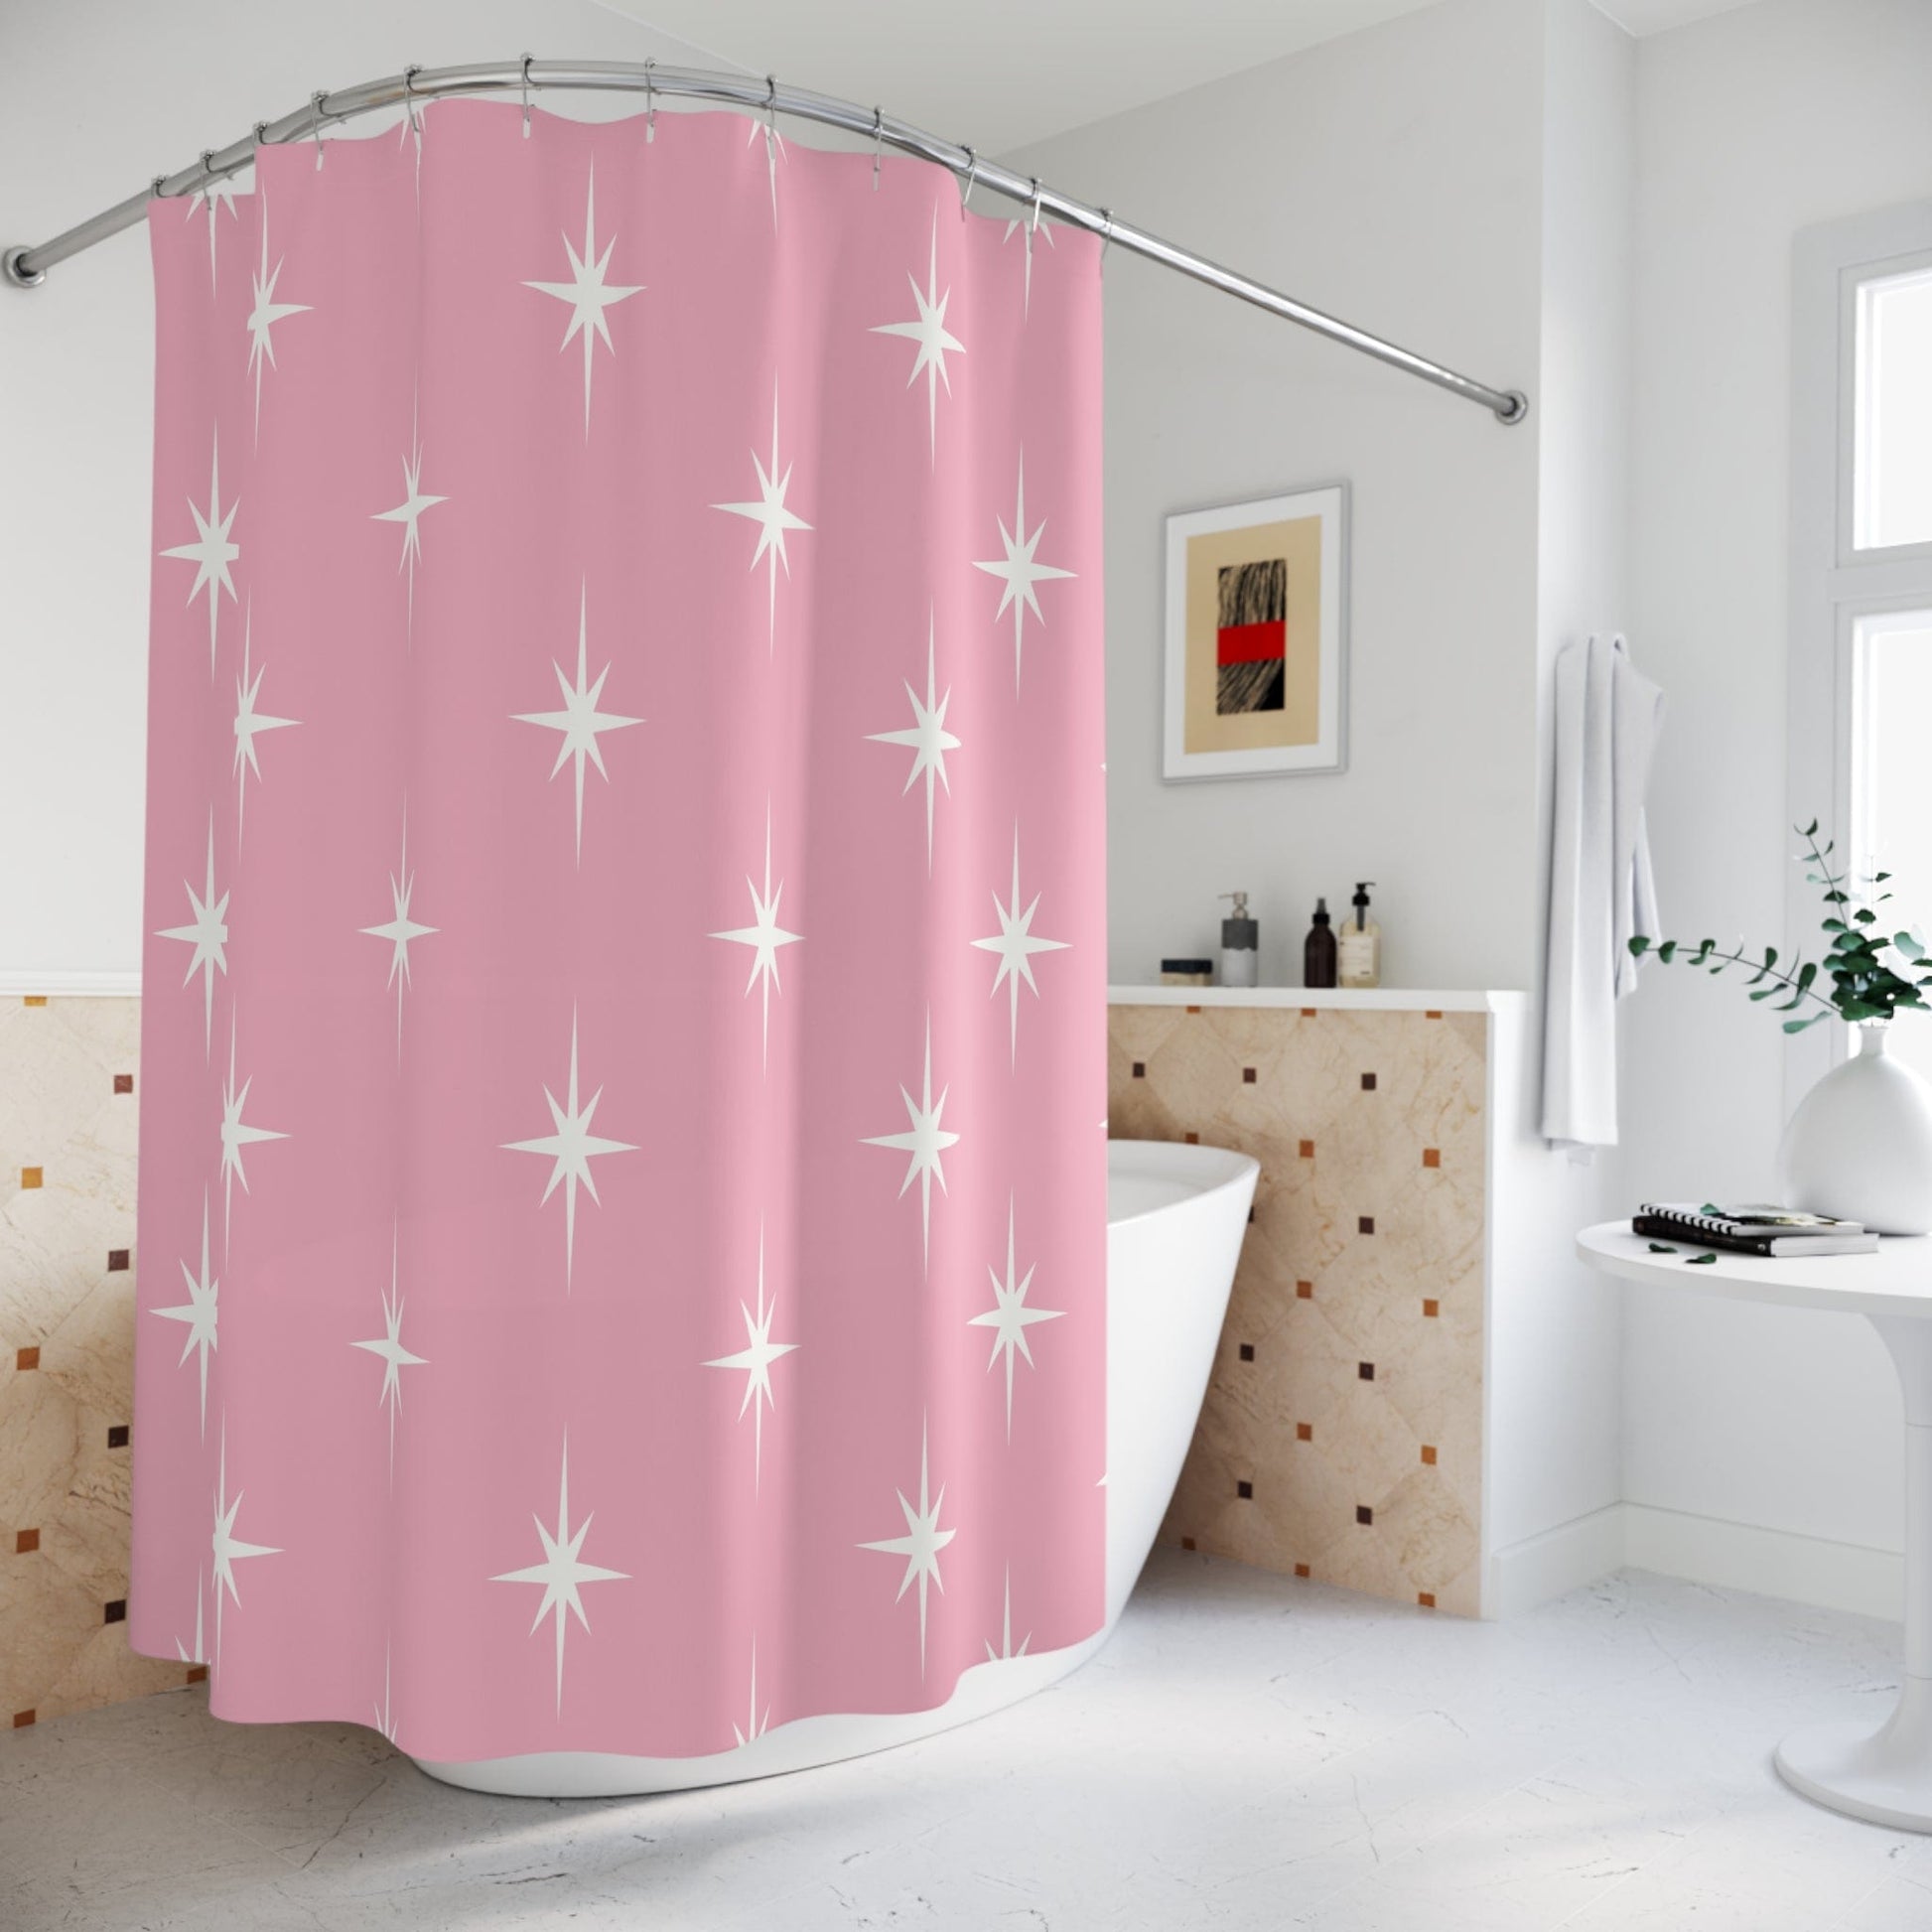 Kate McEnroe New York 50s Retro Mid Century Modern Atomic Starburst Shower Curtains in Vintage Pink and White Shower Curtains 70" × 74" S40-STB-PNK-7X7